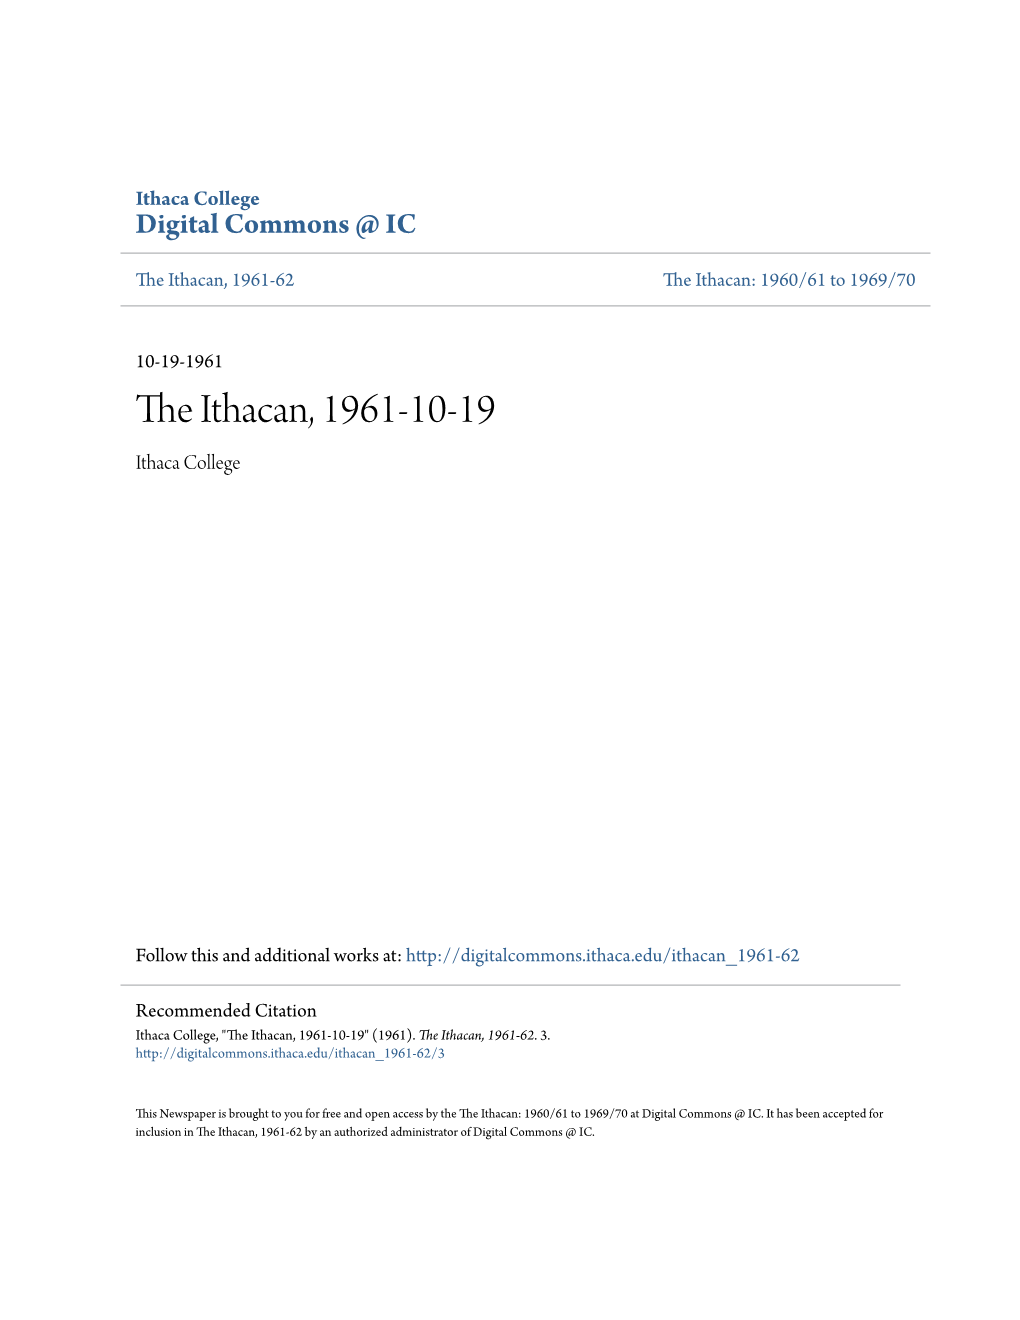 The Ithacan, 1961-10-19